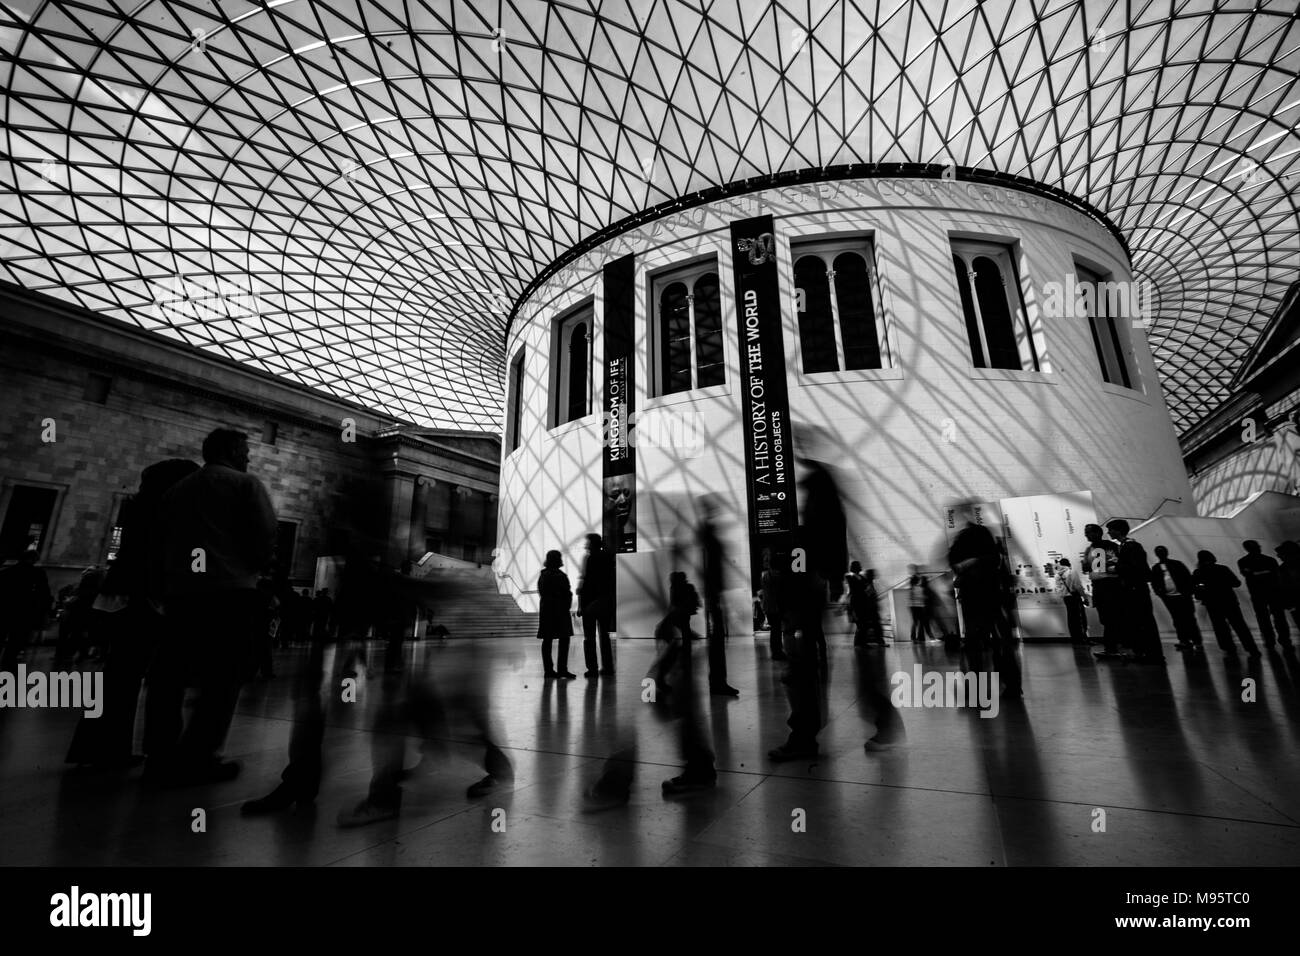 A monachrome depiction of the British Museum in London. Stock Photo